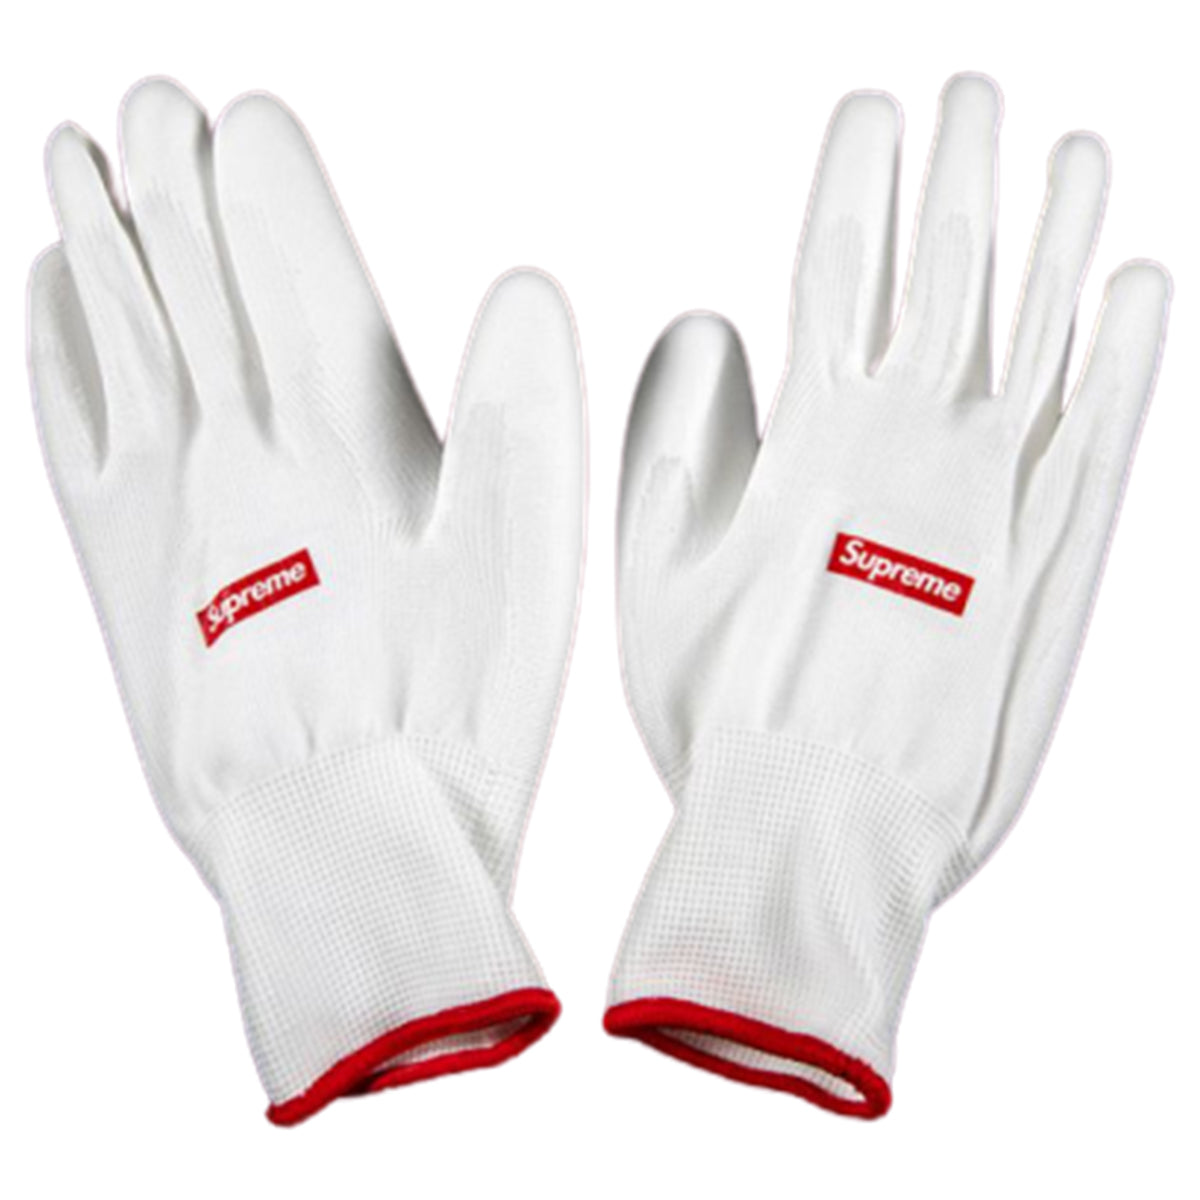 Supreme Rubberized Gloves Unisex Style : Fw20a60